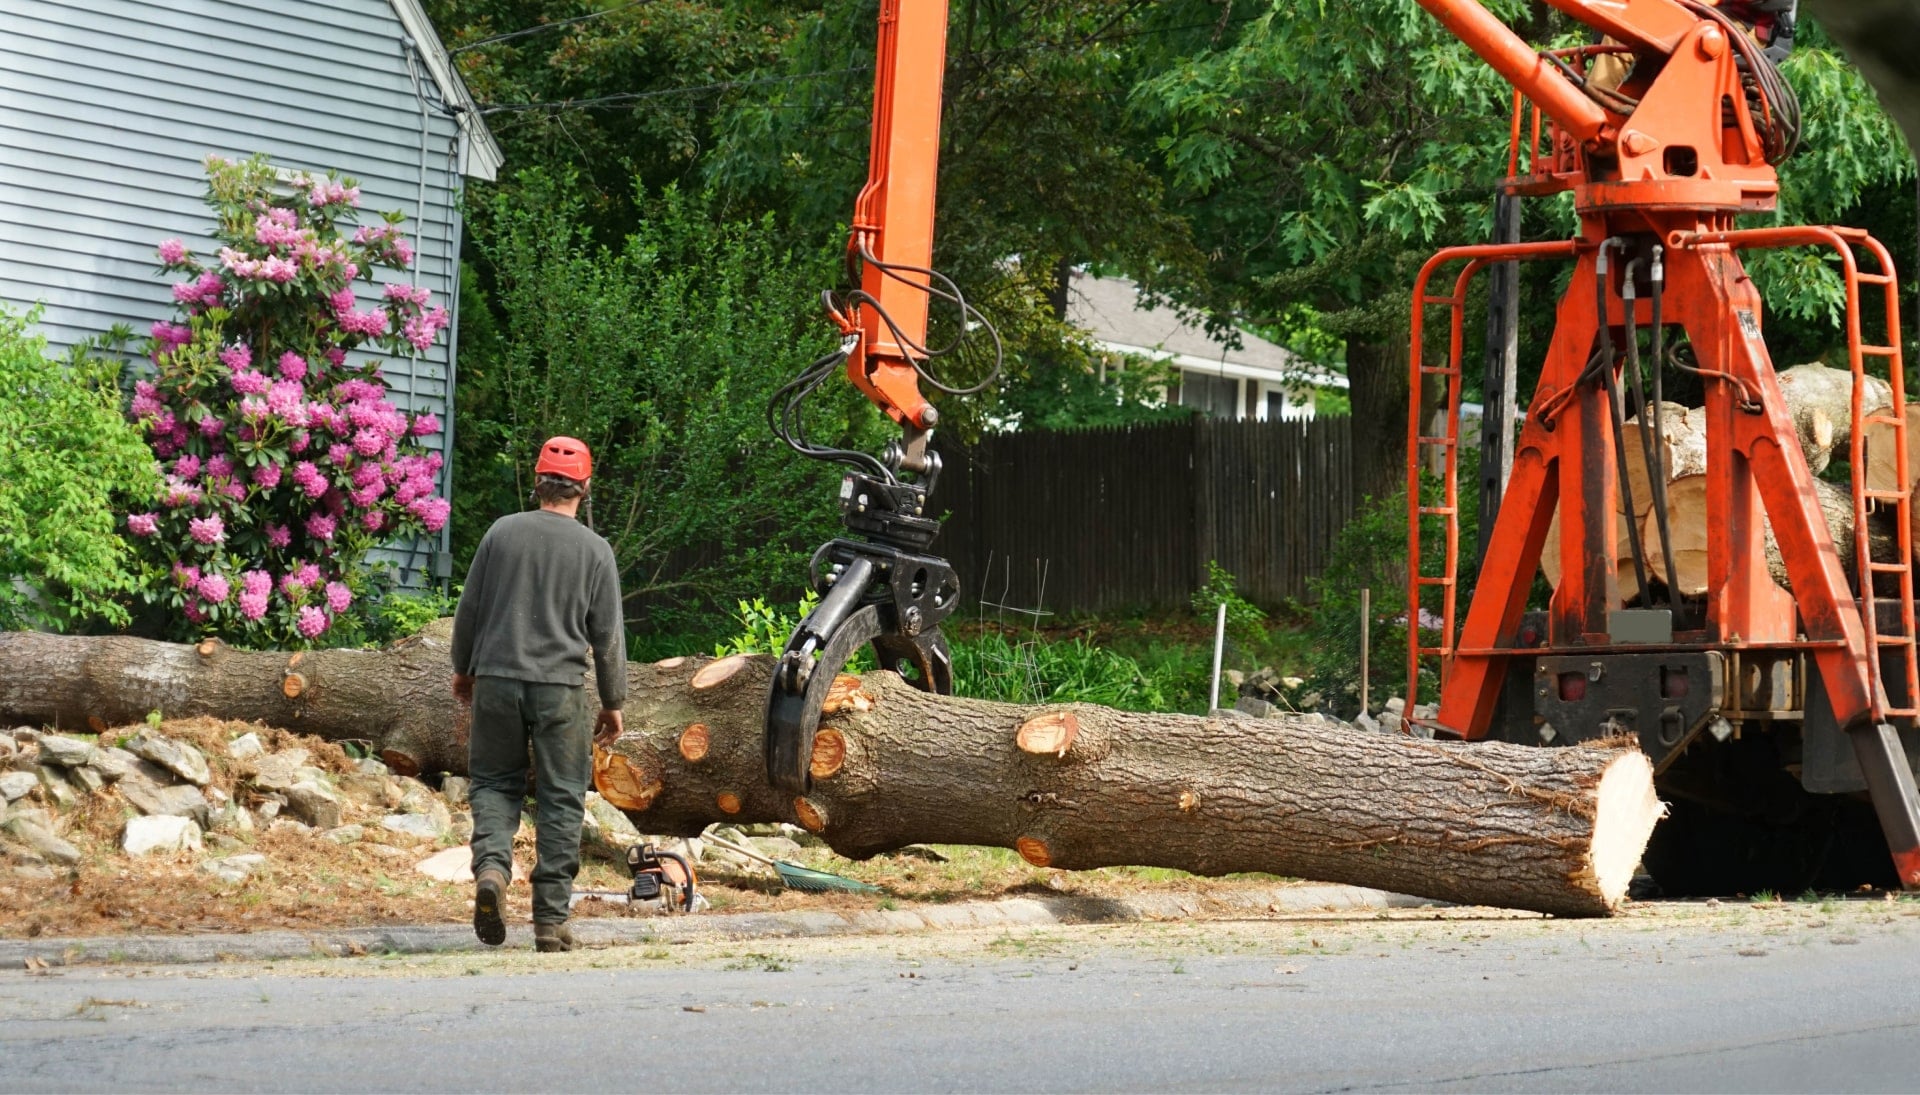 Local partner for Tree removal services in Loveland